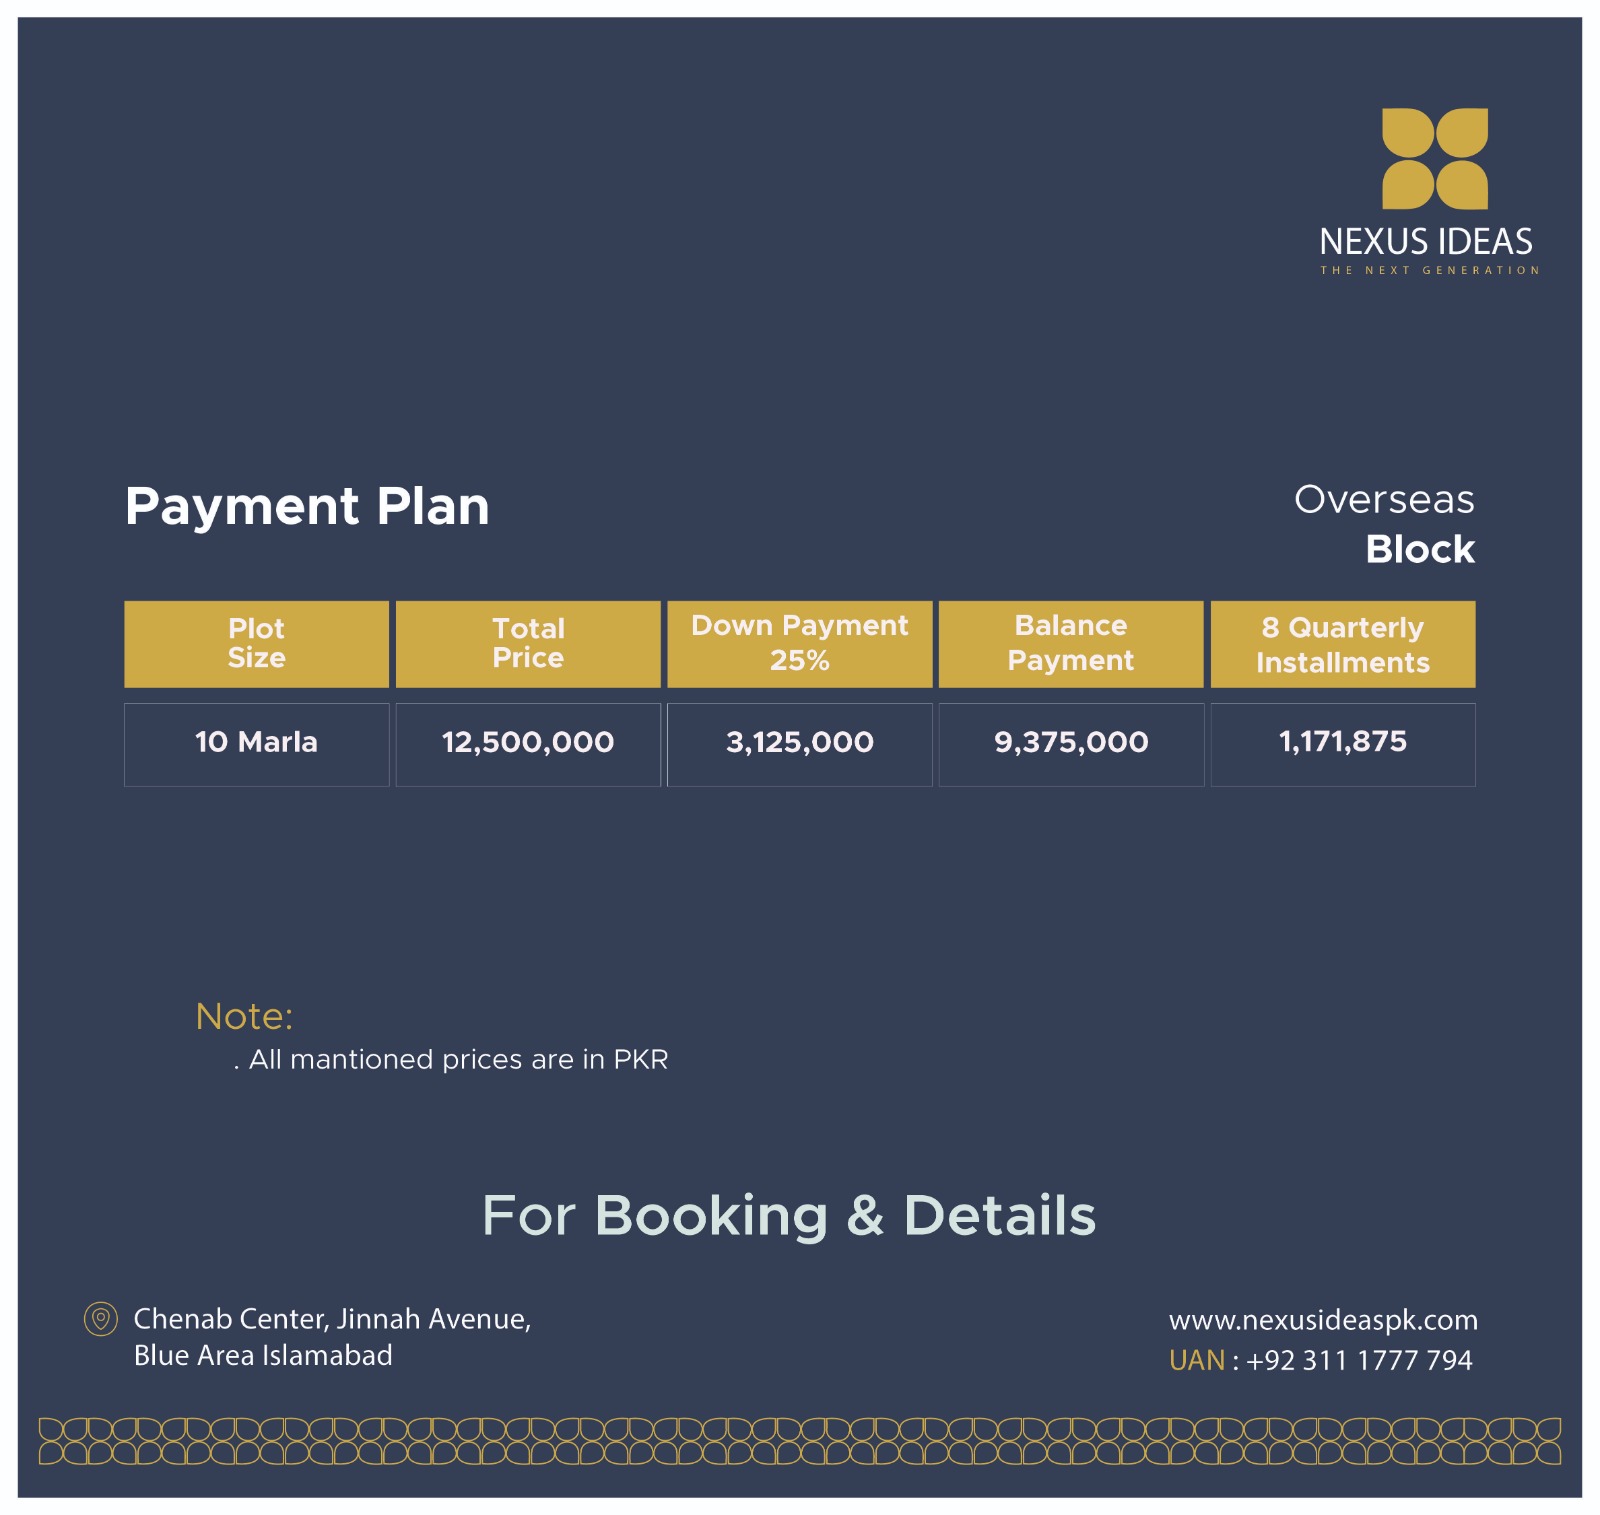 10 Marla Residential and Commercial Plots Payment Plan